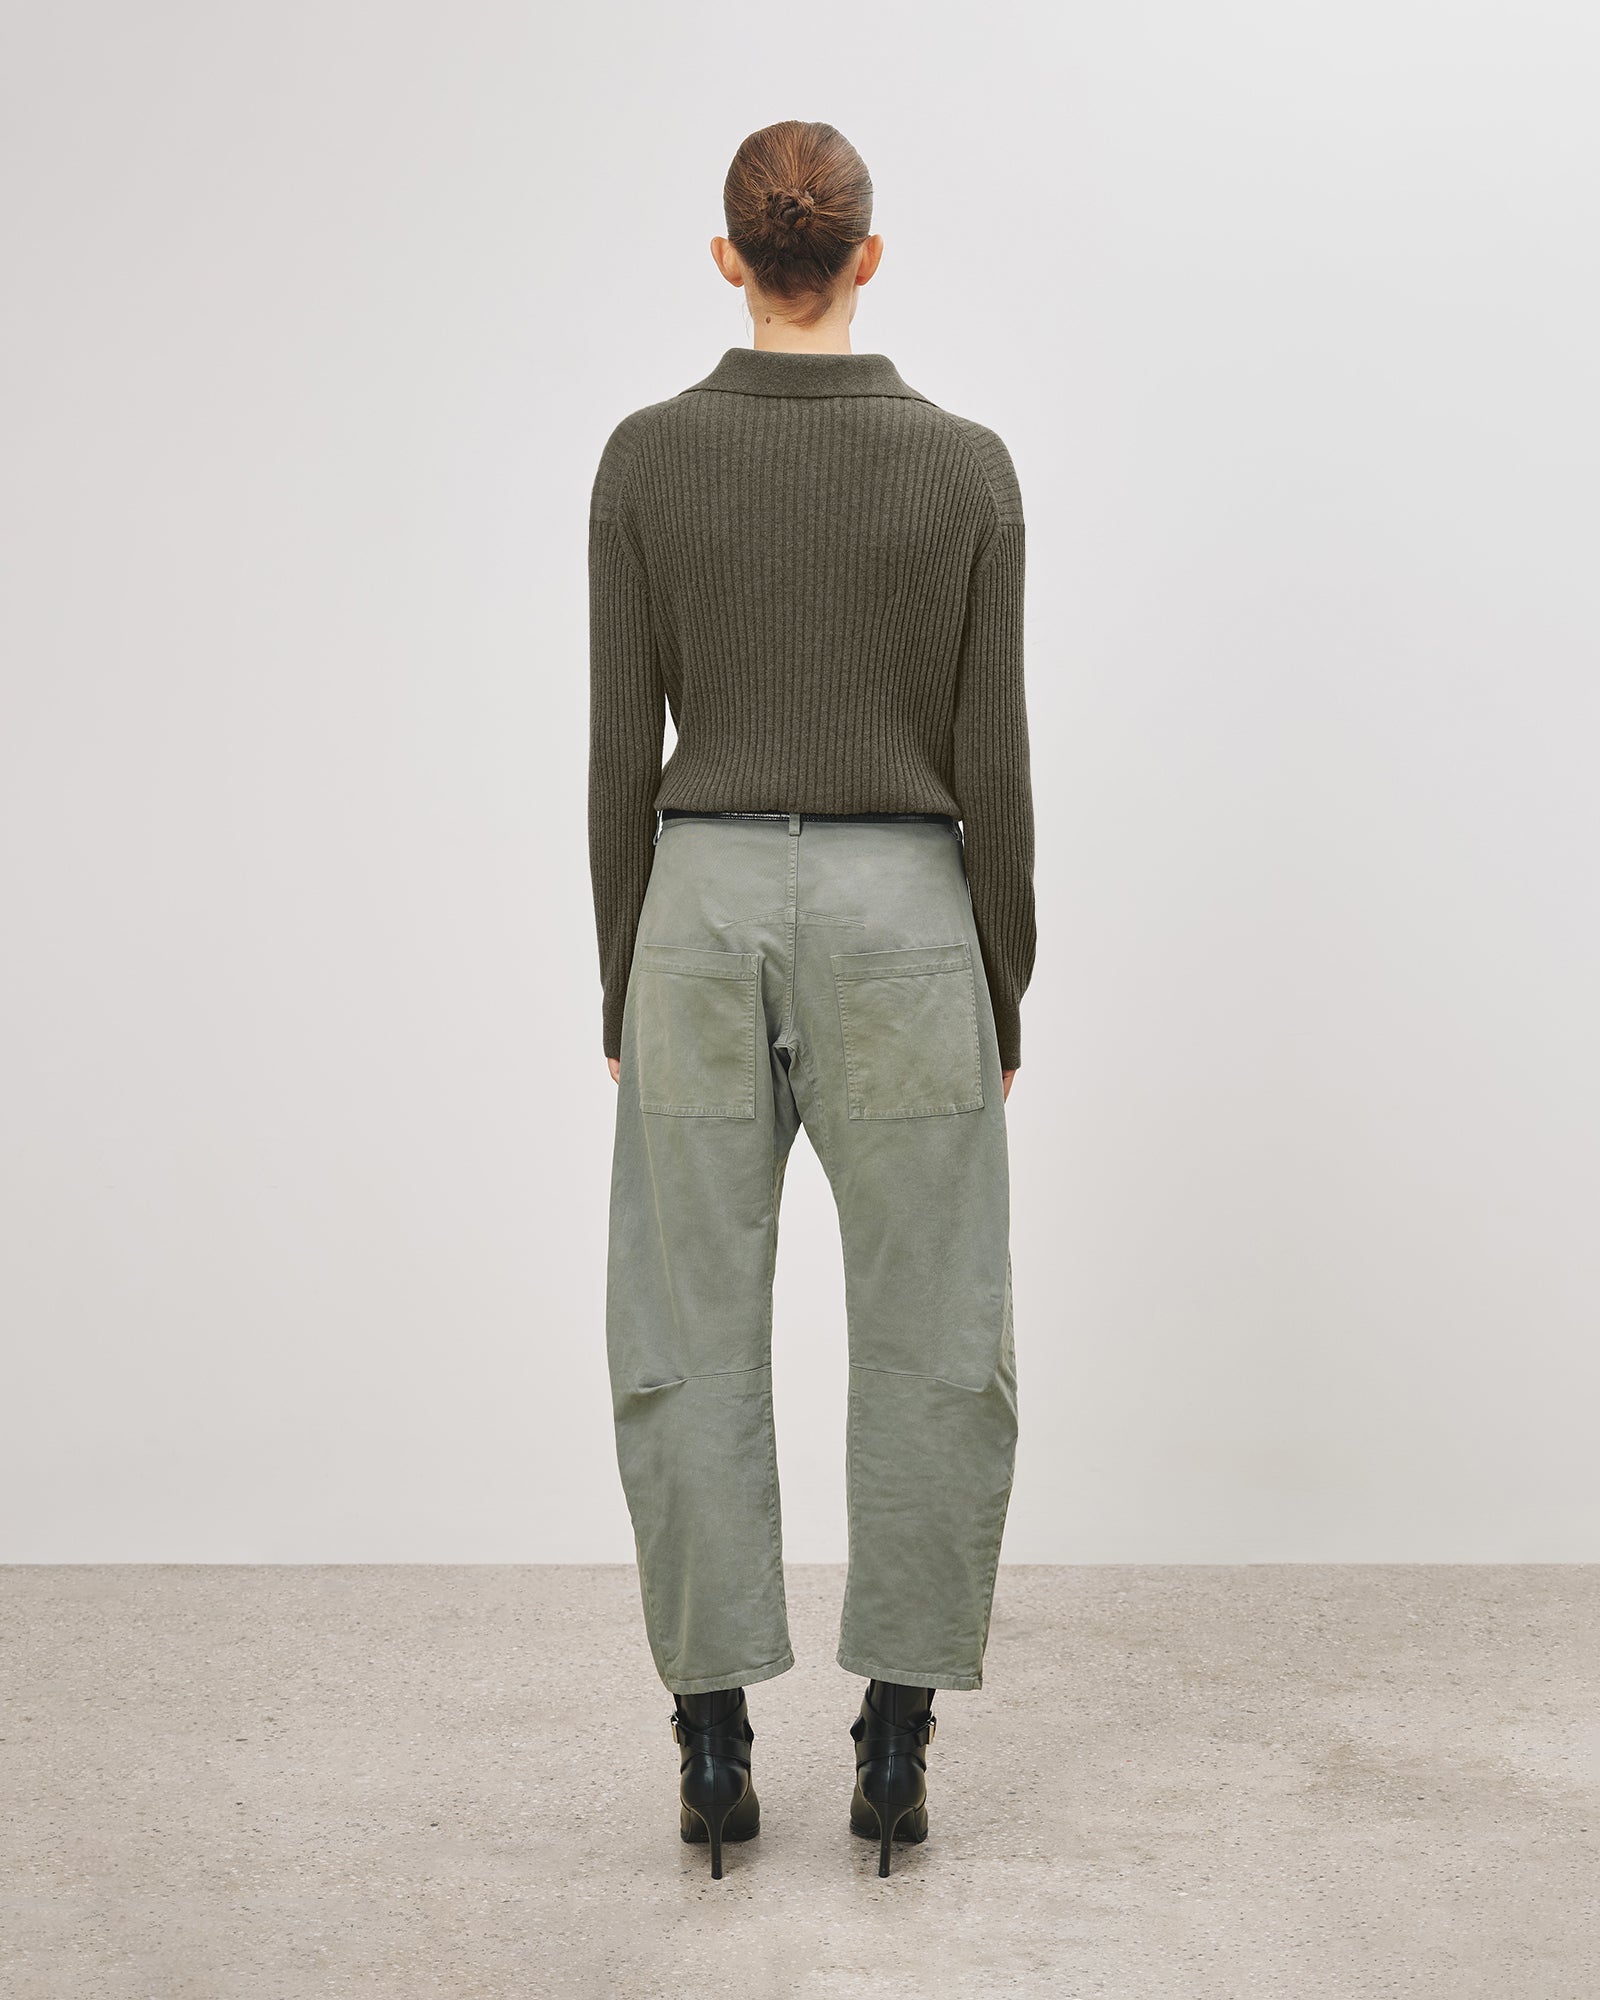 The Nili Lotan Shon Pant in Admiral Green available at The New Trend Australia